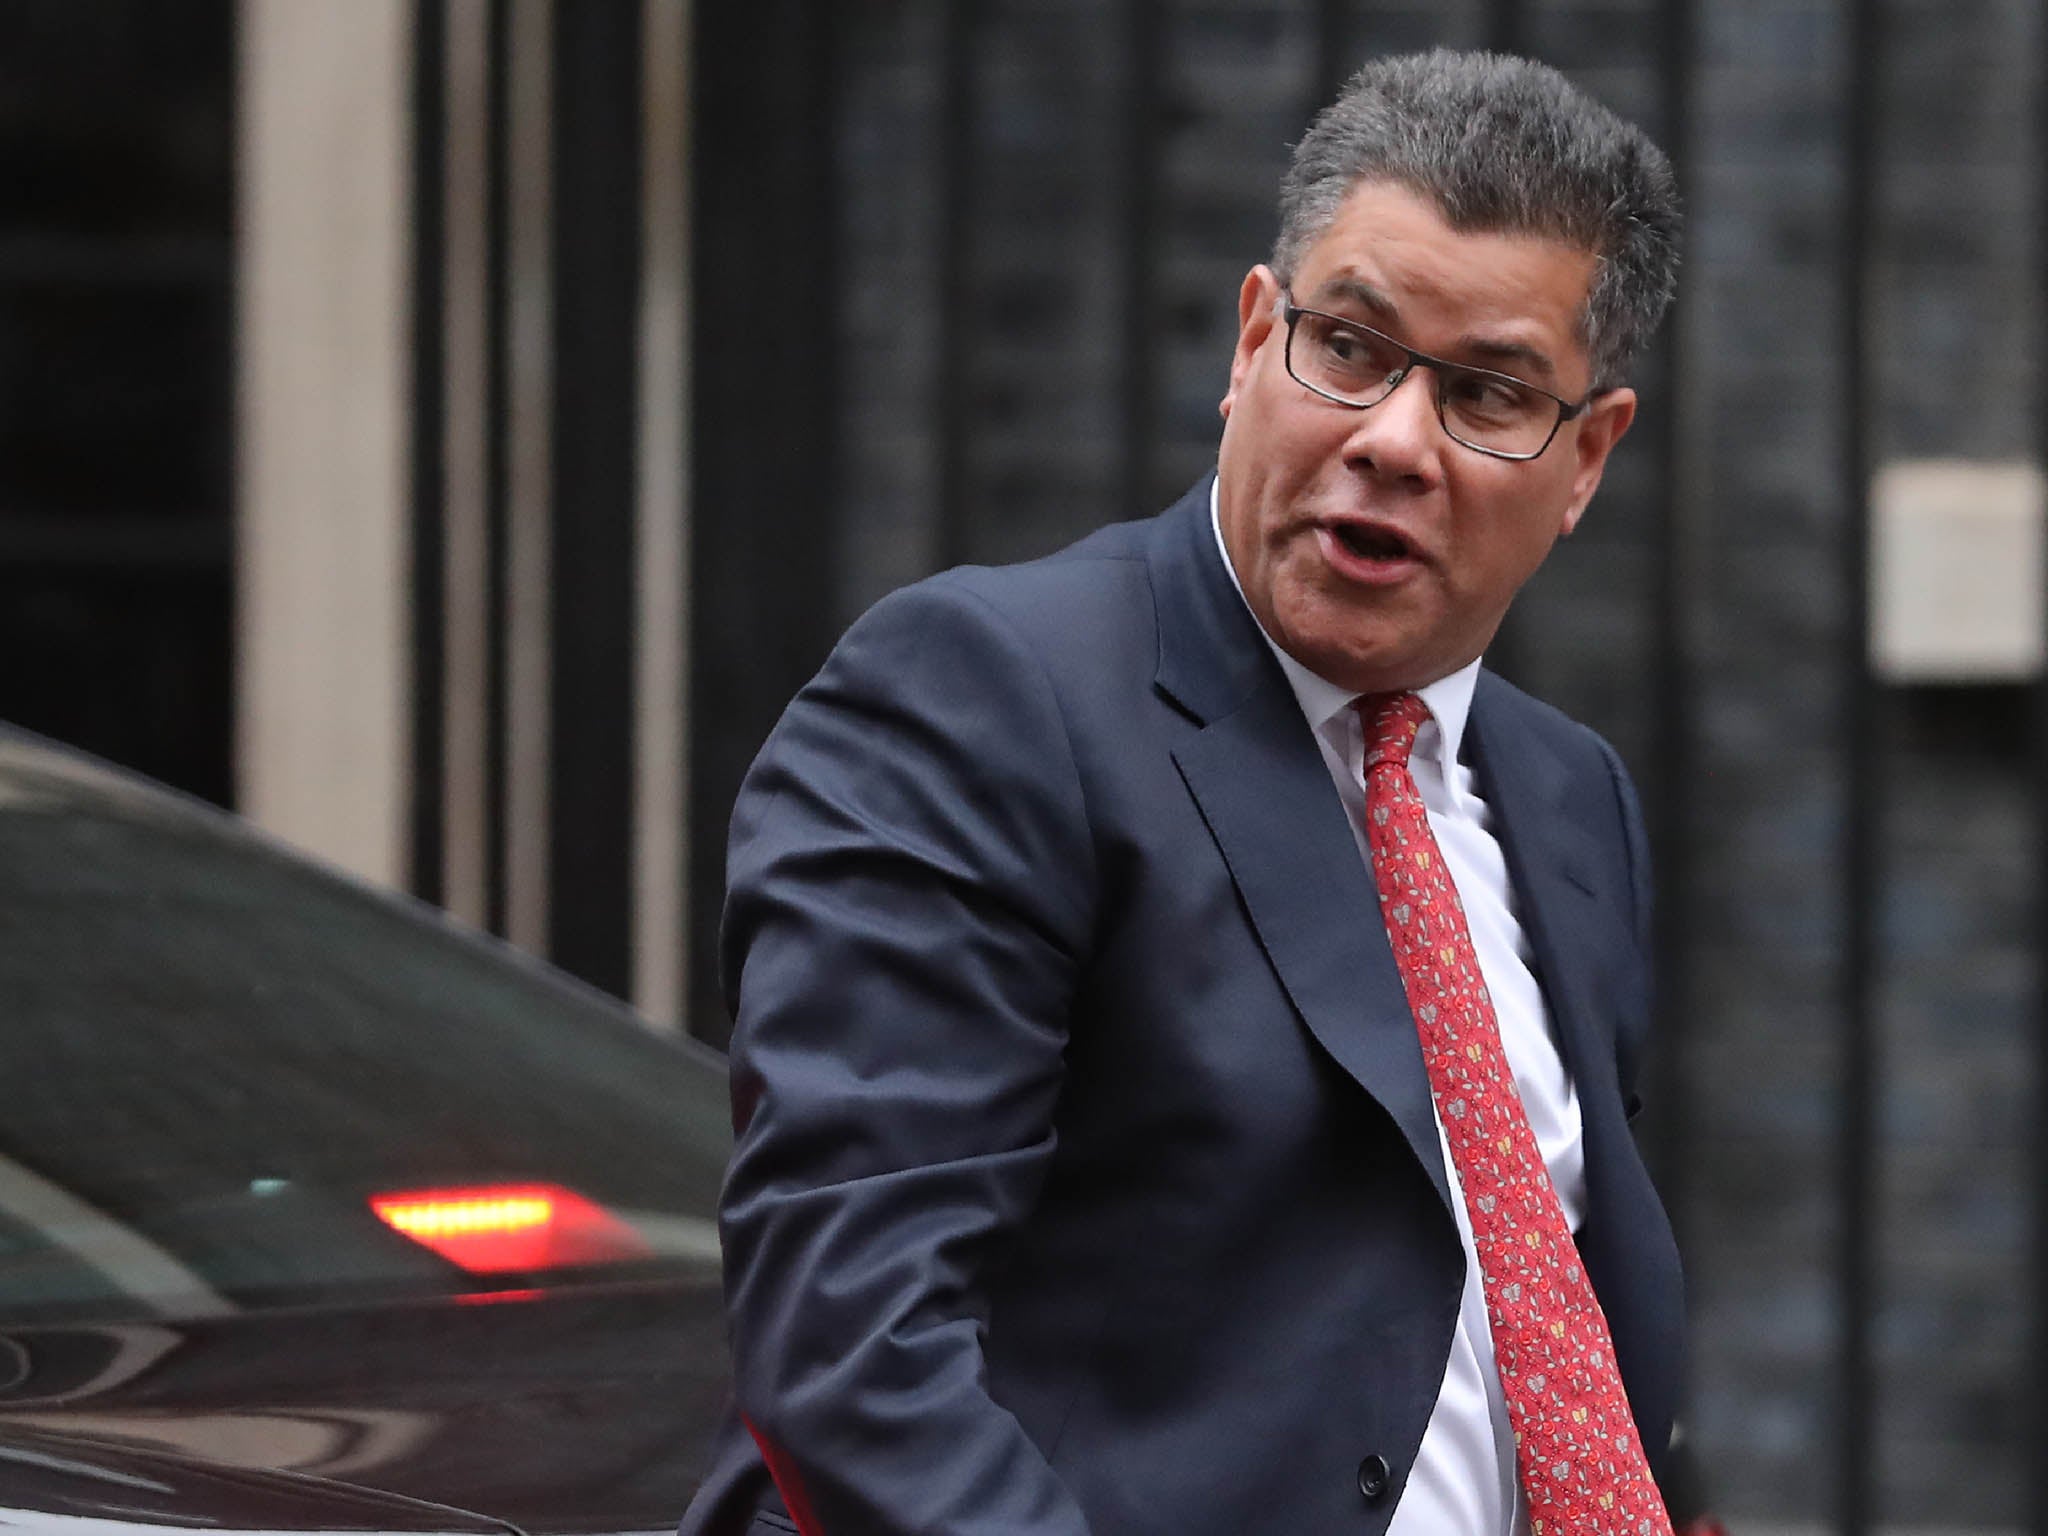 Alok Sharma, the employment minister, appeared to dismiss legitimate criticism of universal credit